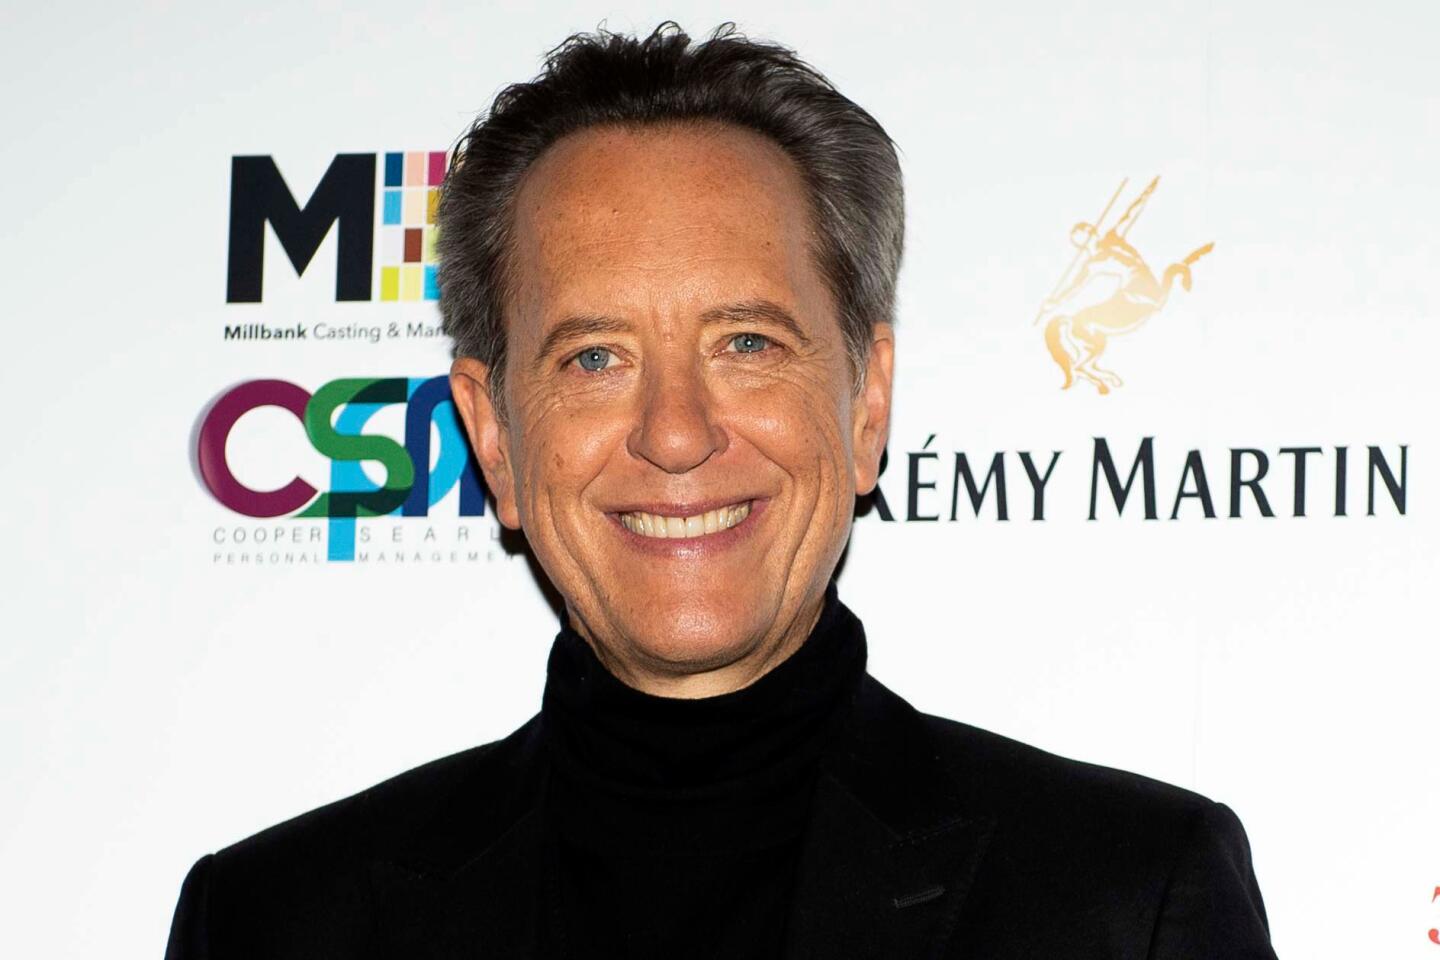 A veteran character actor, Richard E. Grant broke onto the scene in 1987’s cult favorite “Withnail and I.” He's enjoyed the most sustained awards buzz of his career with his first Oscar nomination following recognition from SAG, BAFTA and the Golden Globes. He previously won a SAG Award as part of the ensemble cast of “Gosford Park.”